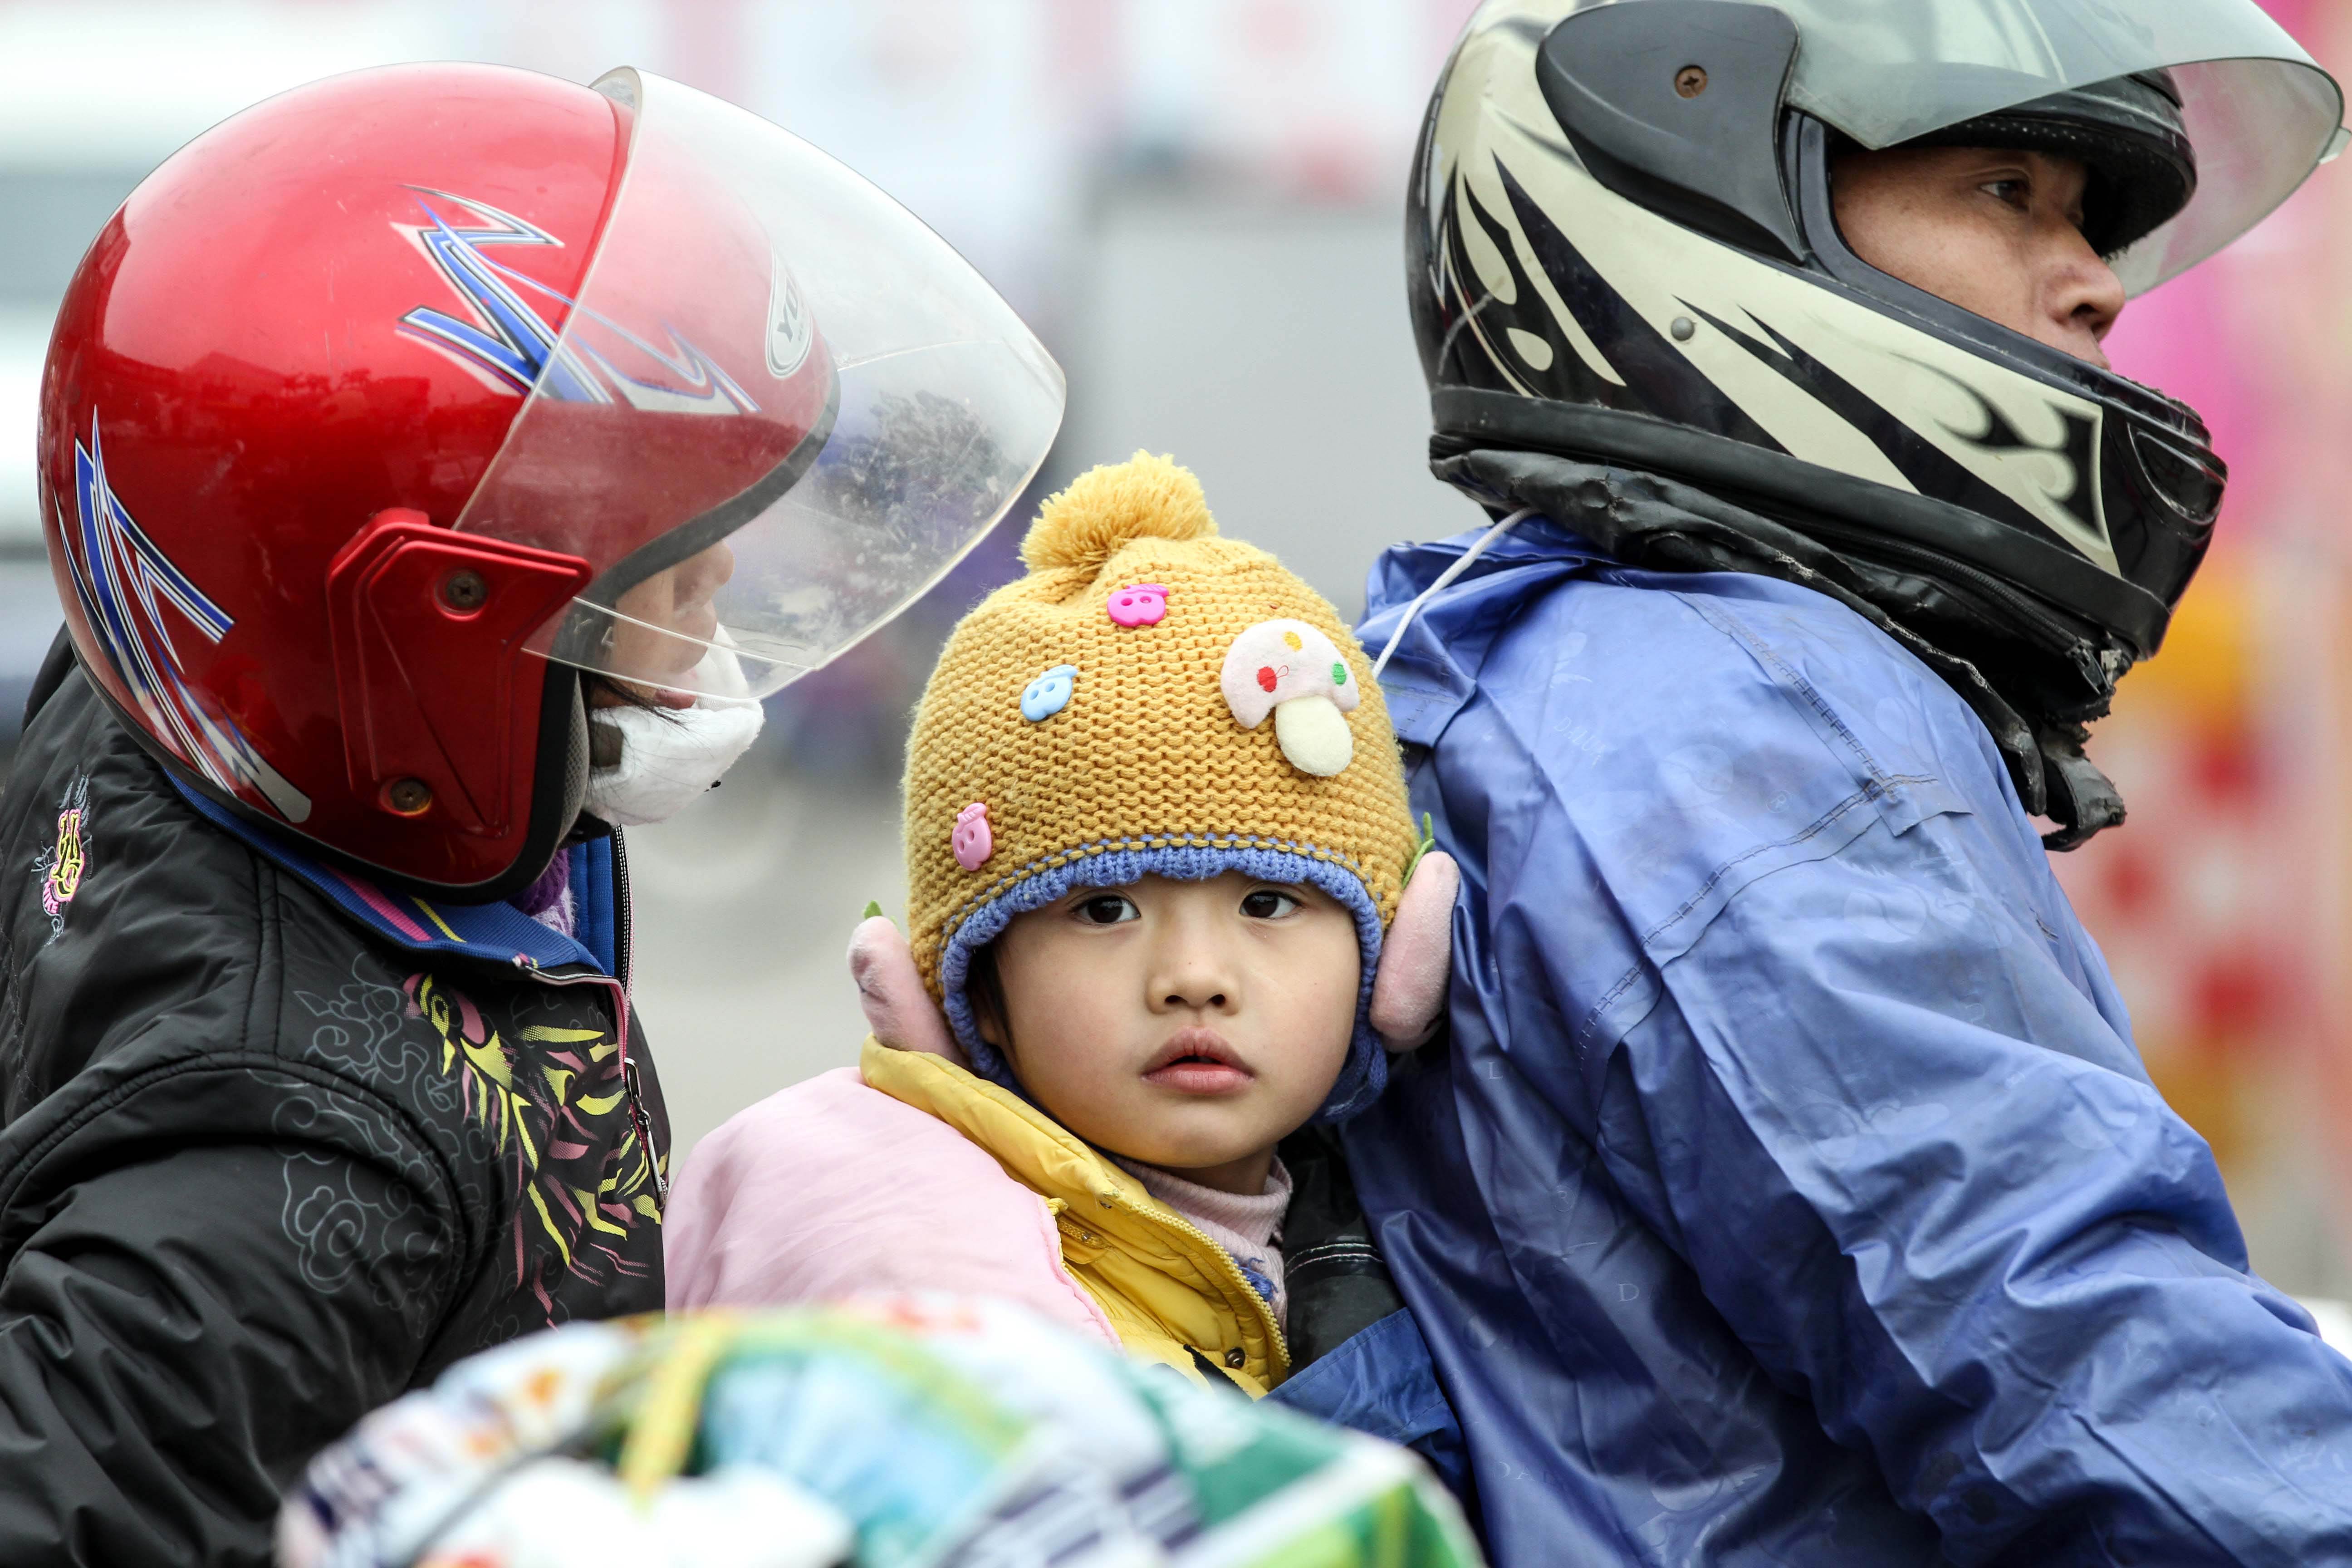 A Chinese family arrive on a motorcycle at a pit stop in Wuzhou, Guangxi province. Photo: AFP